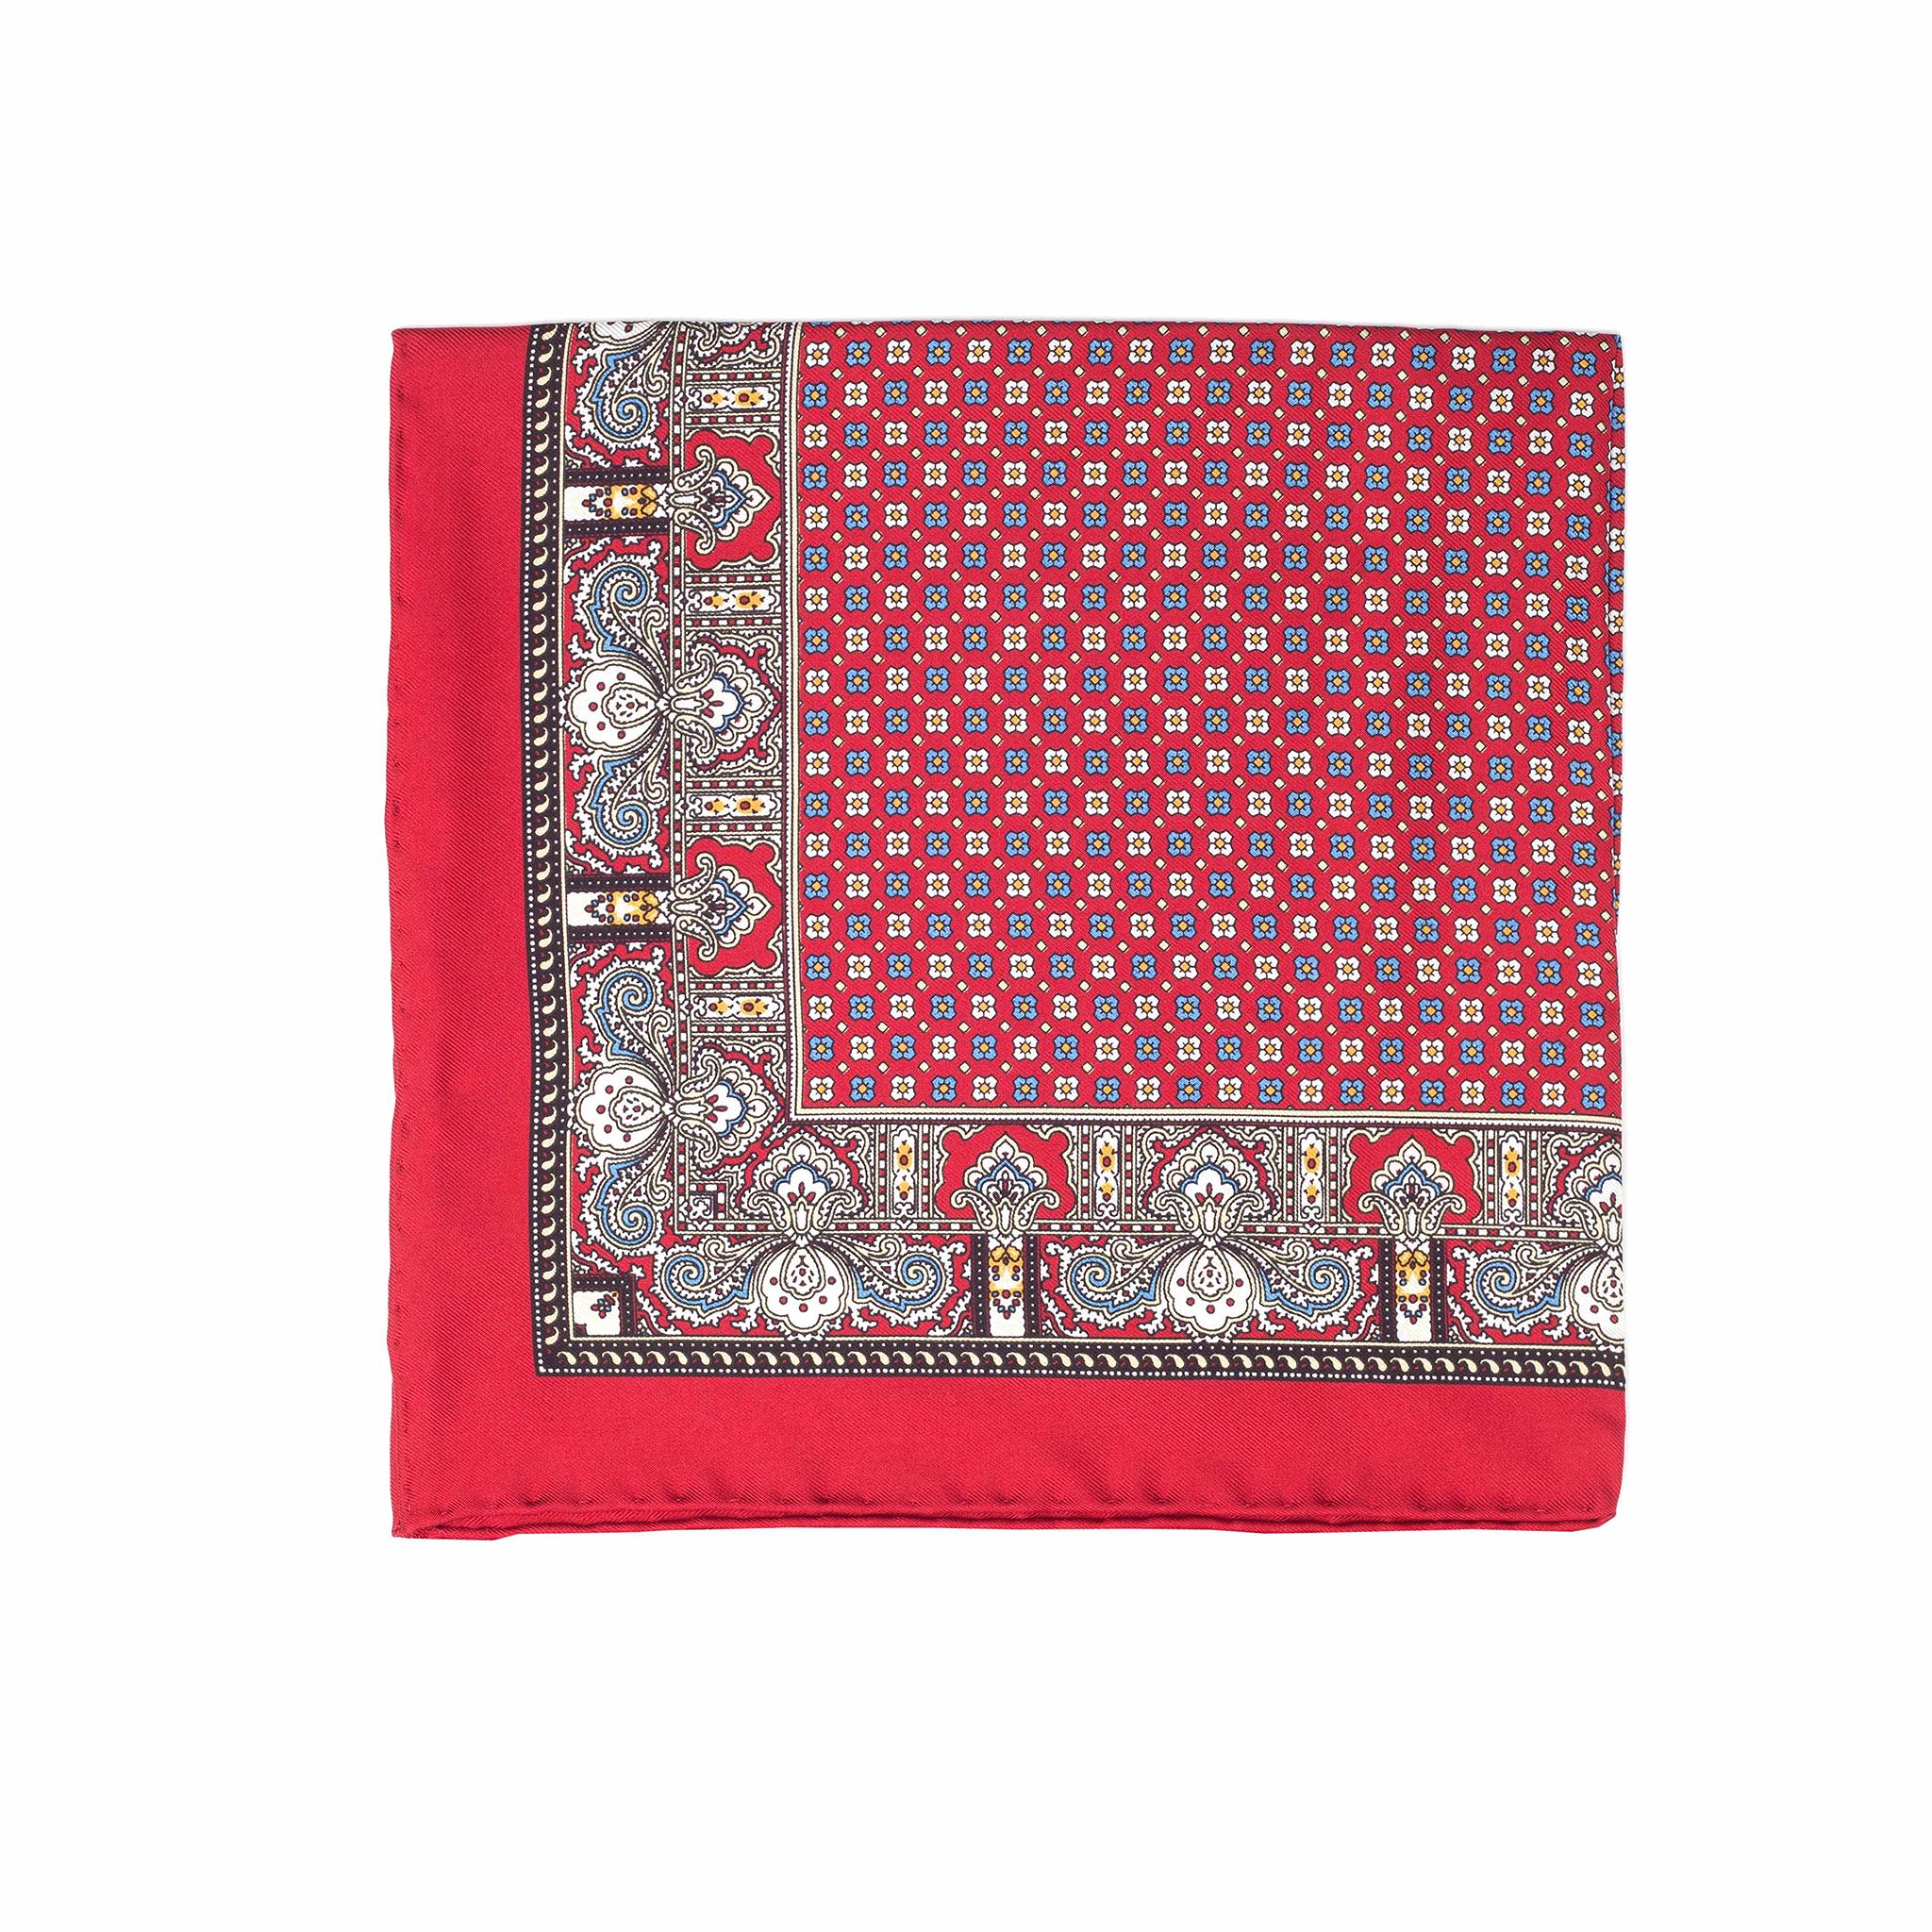 Silk Pocket Square with Hand-Rolled Edges, Red Classic Border